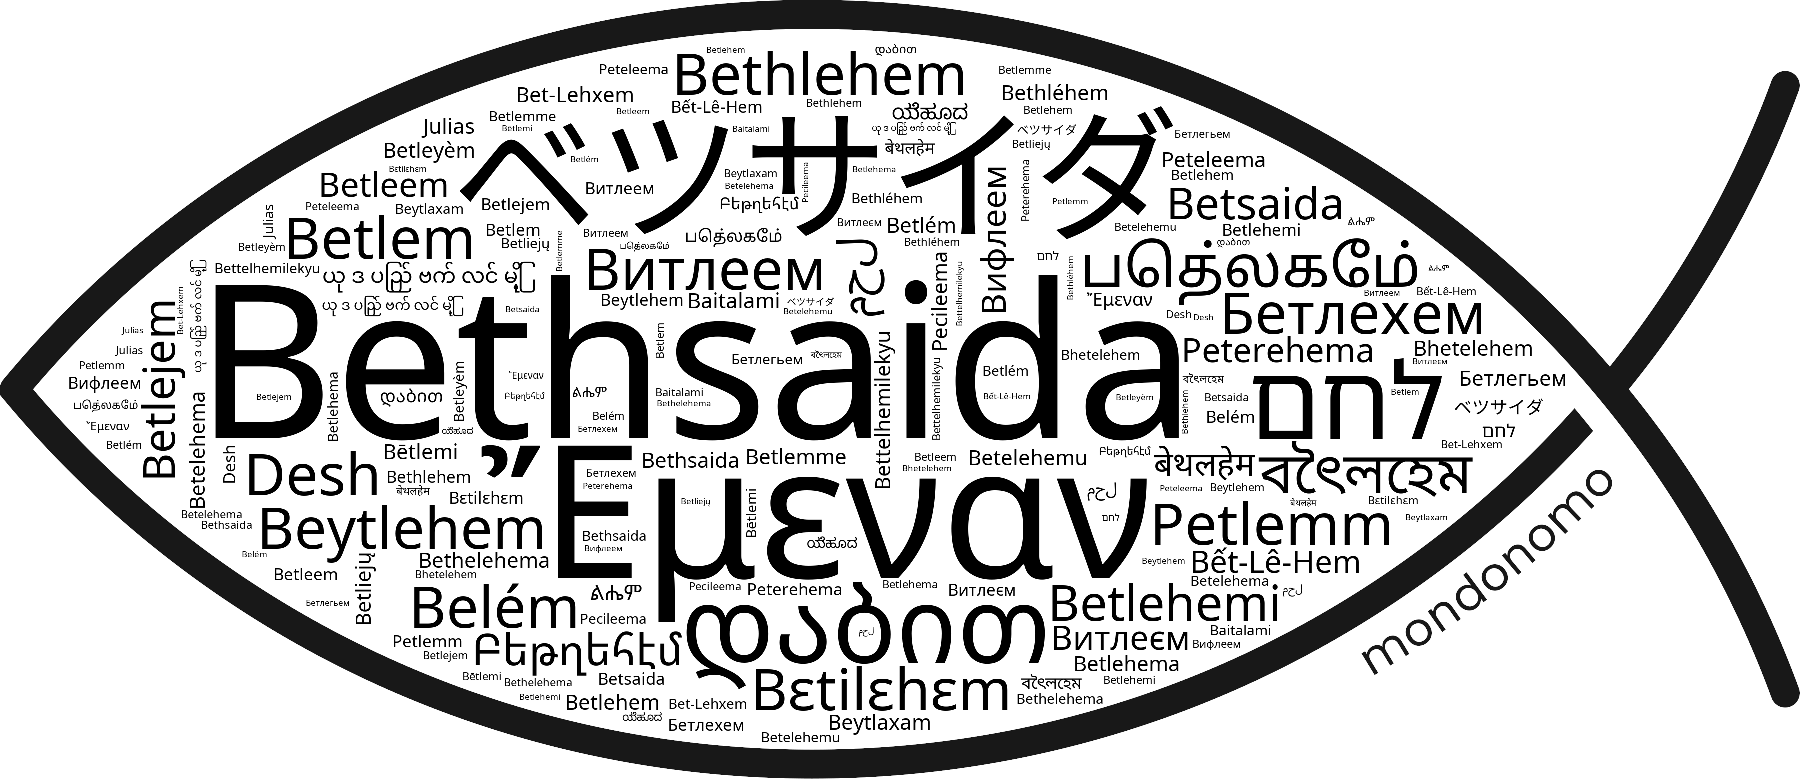 Name Bethsaida in the world's Bibles